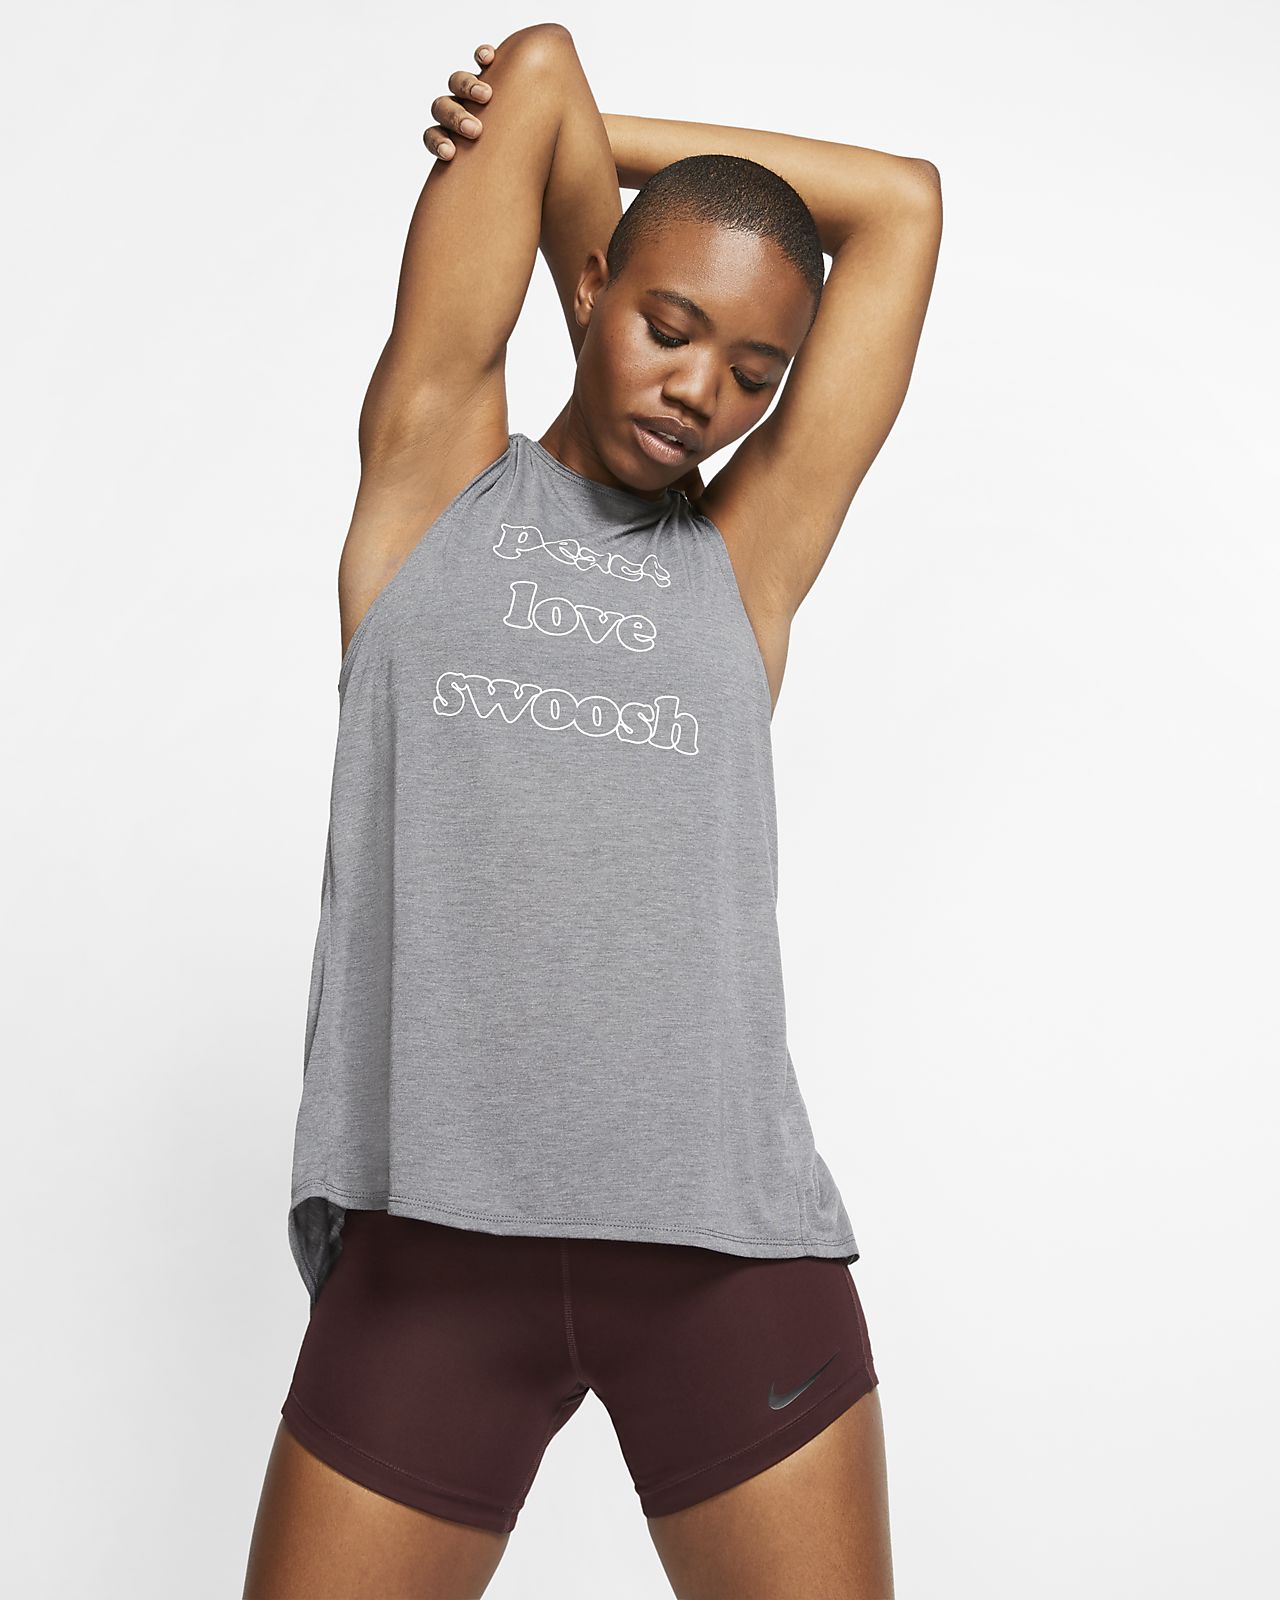 Best Nike womens workout tanks for Push Pull Legs